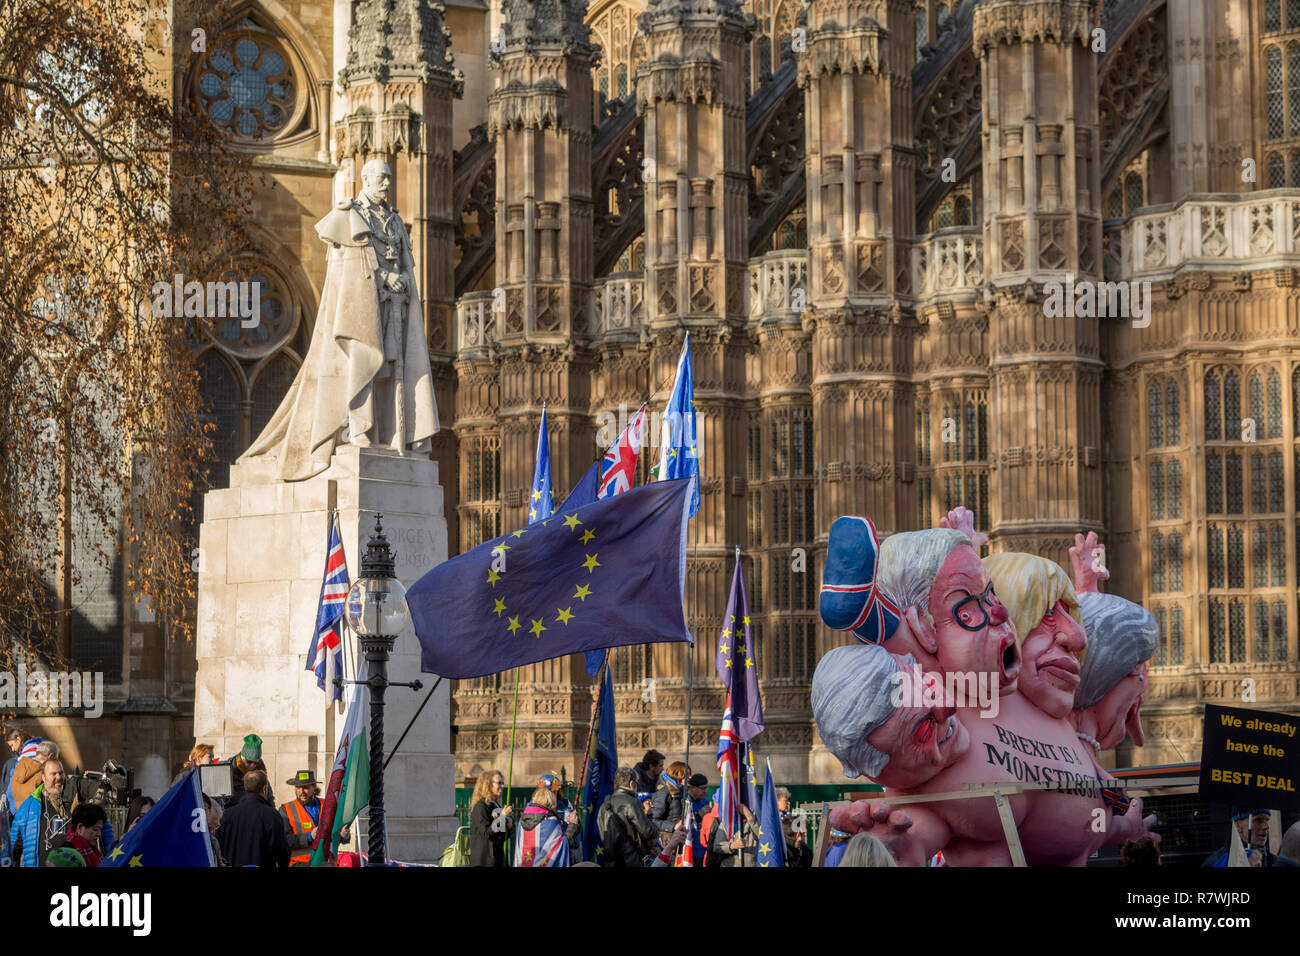 London, UK 11th December 2018: As Prime Minister Theresa May tours European capitals hoping to persuade foreign leaders to accept a new Brexit deal (following her cancellation of a Parliamentary vote), pro-EU Remainers protest beneath the statue of King George V beneath Westminster Abbey and opposite the Houses of Parliament, on 11th December 2018, in London, England. Photo by Richard Baker / Alamy Live News Stock Photo